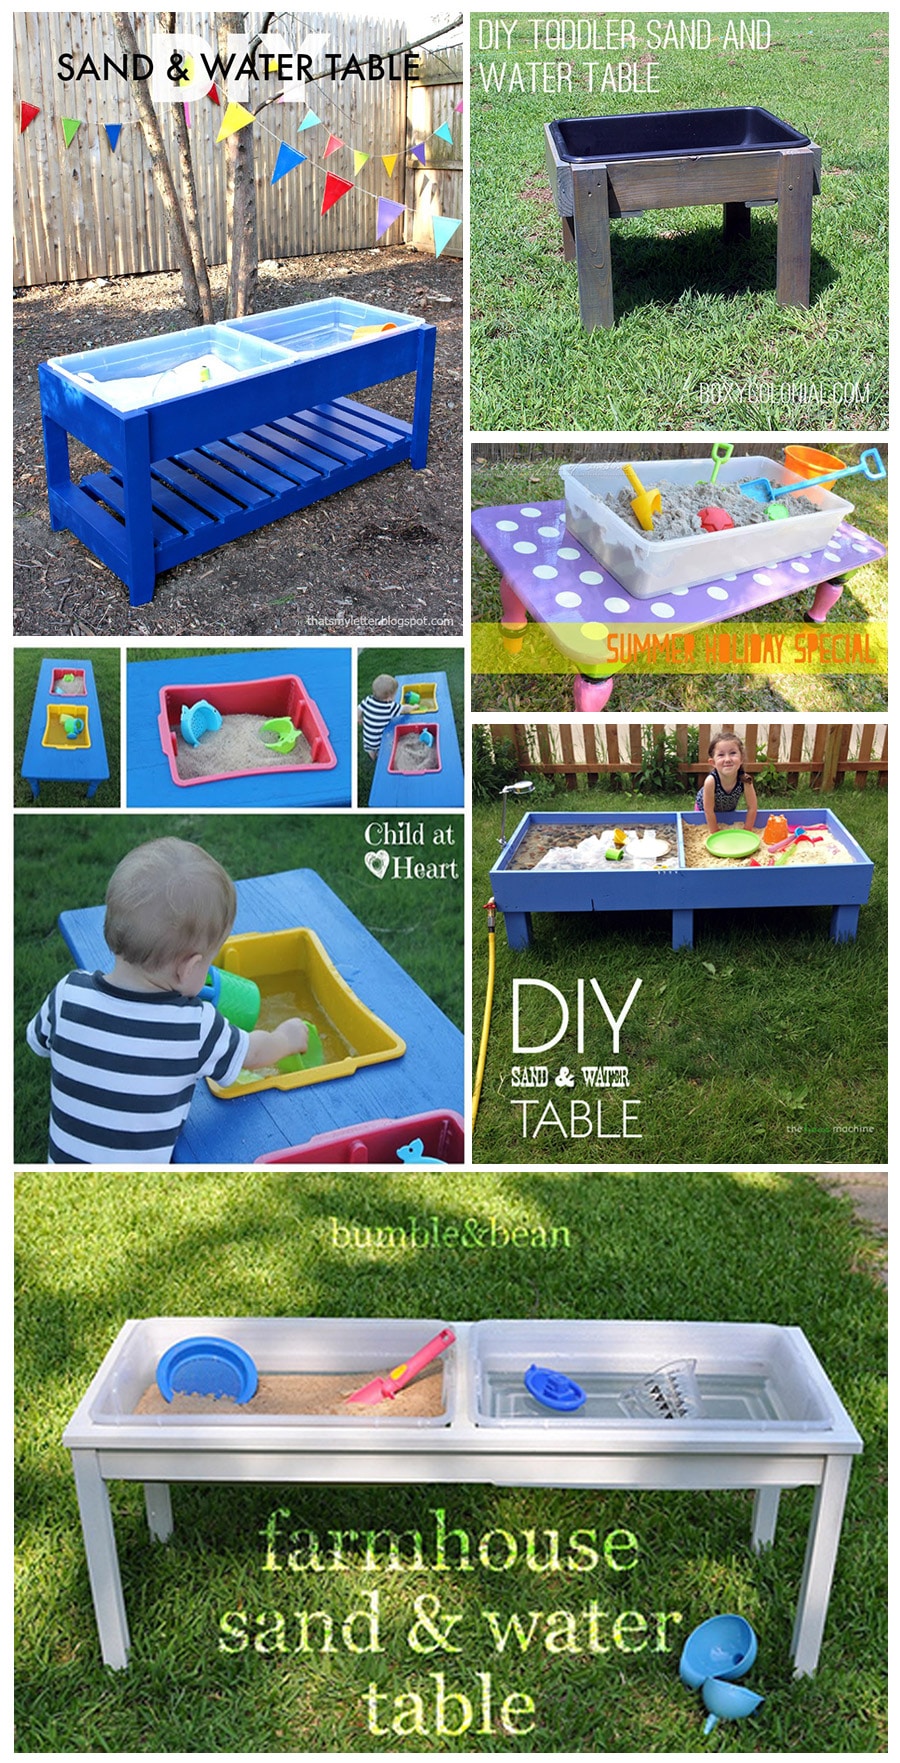 How to build a DIY sand and water table